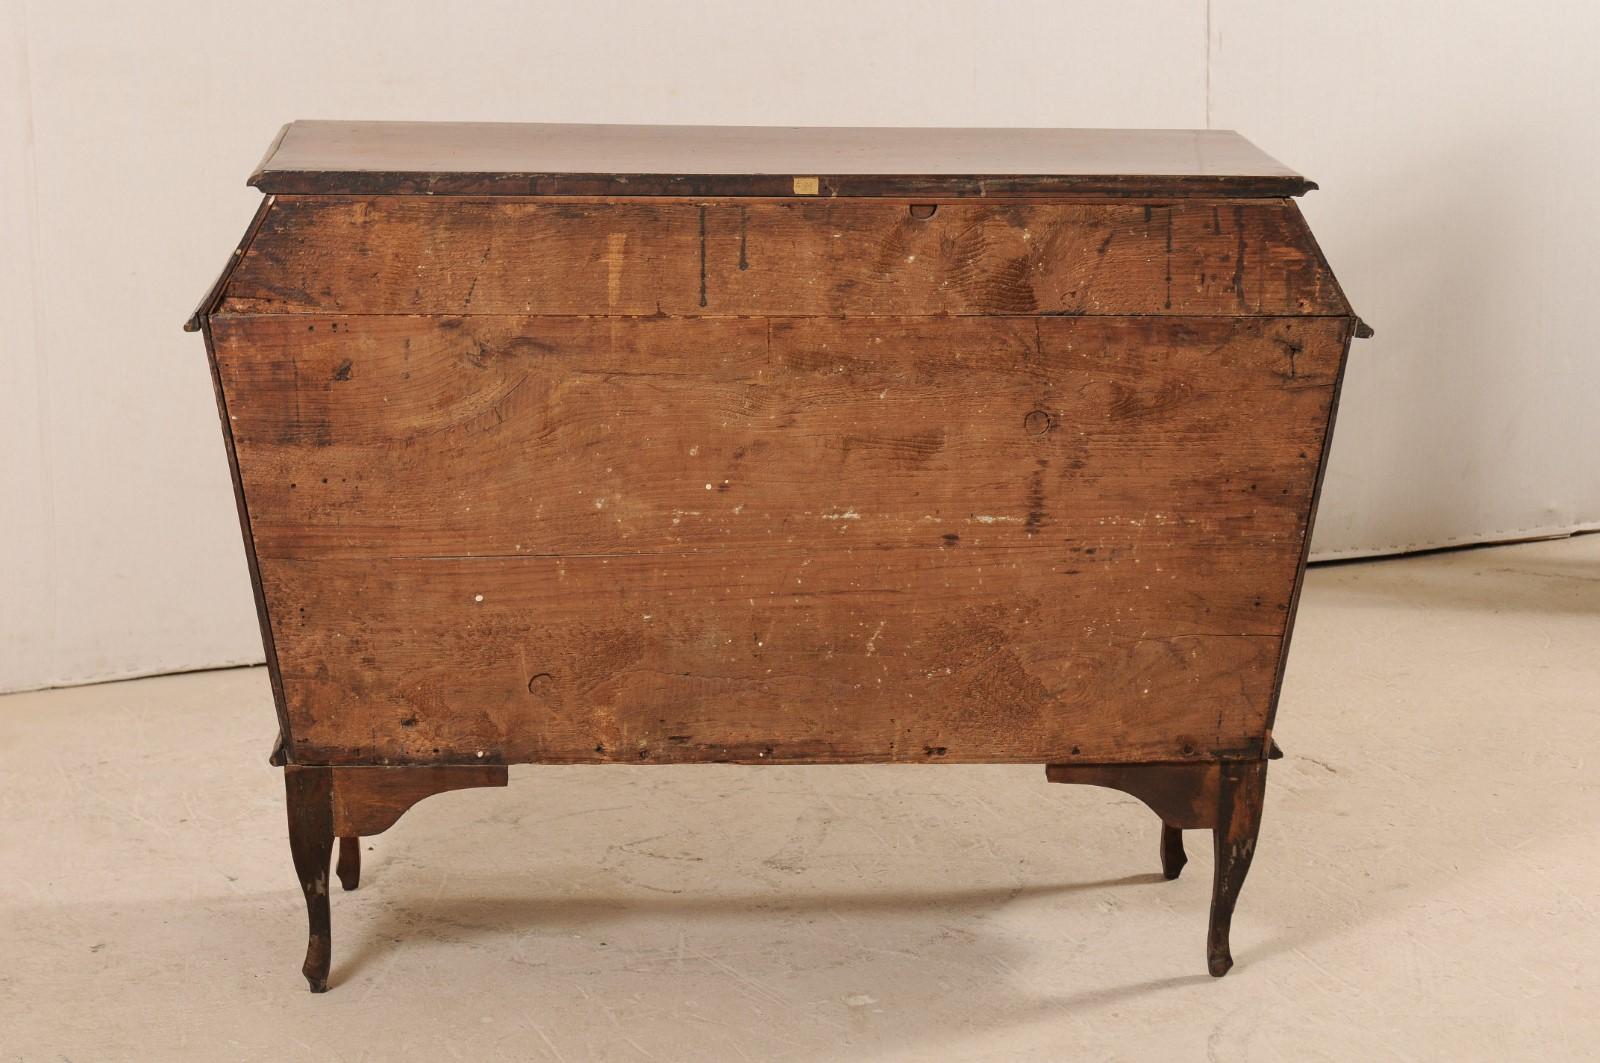 An Exceptional Late 18th C. Italian Walnut Commode w/ Unique Triangulated Shape For Sale 4